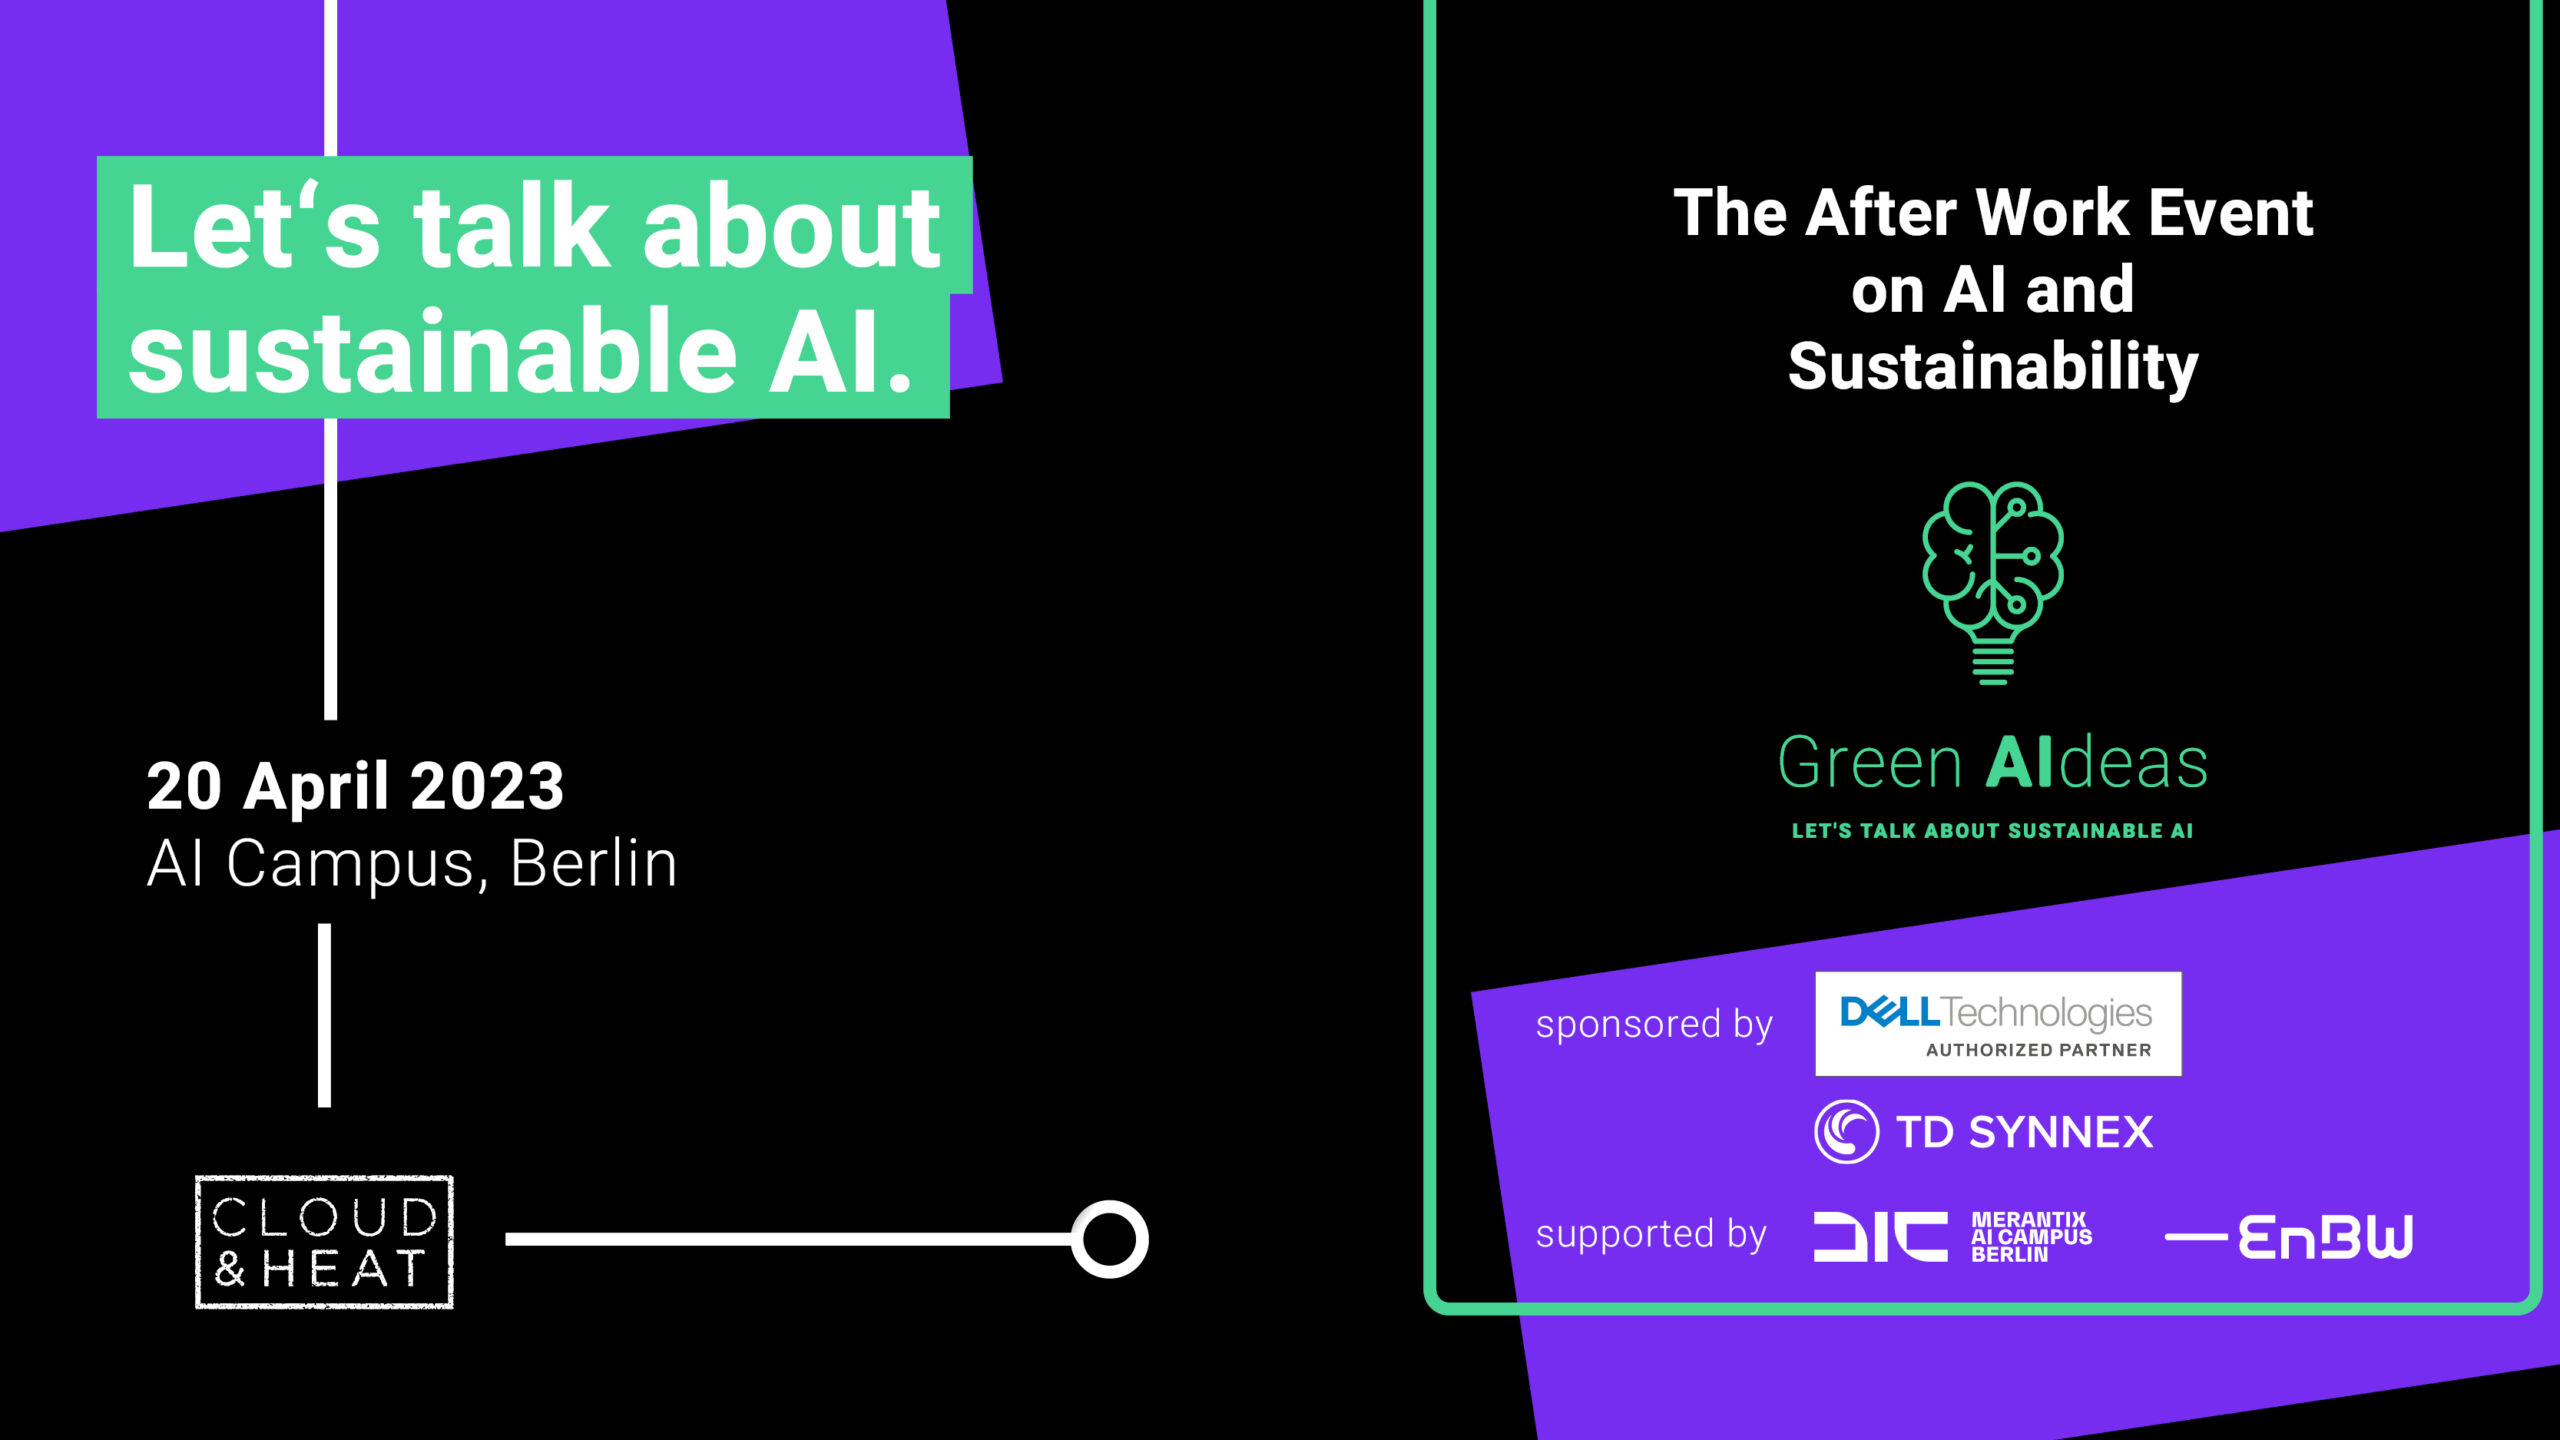 Cloud&Heat | Green AIdeas #2 - Let's talk about sustainable AI | 20.04.20.23 in Berlin